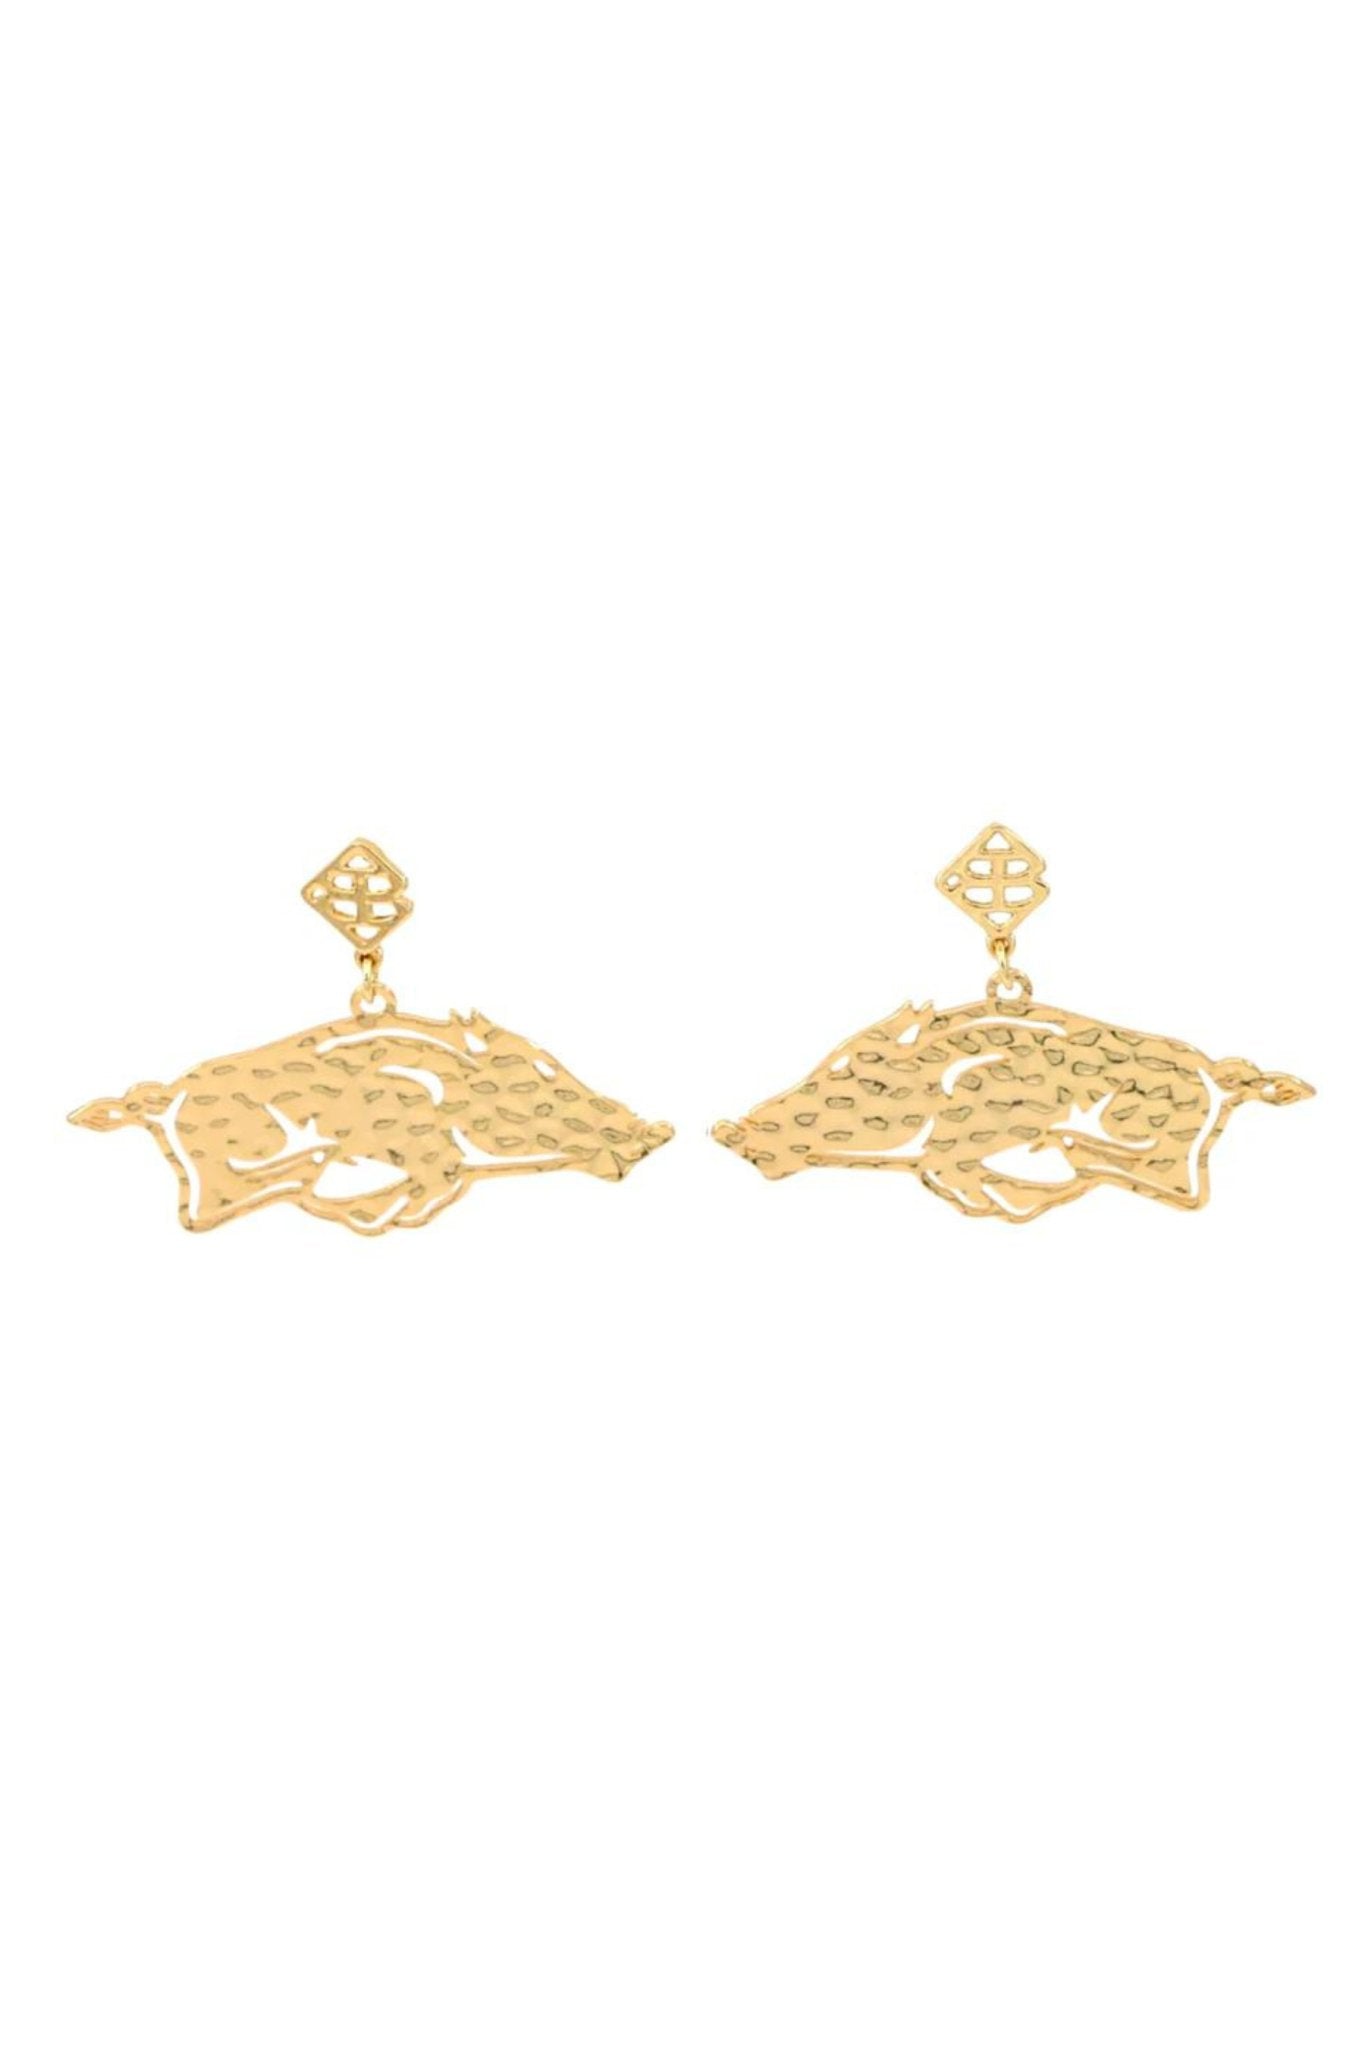 Gold Running Razorback Earrings - Brianna Cannon - Color Game